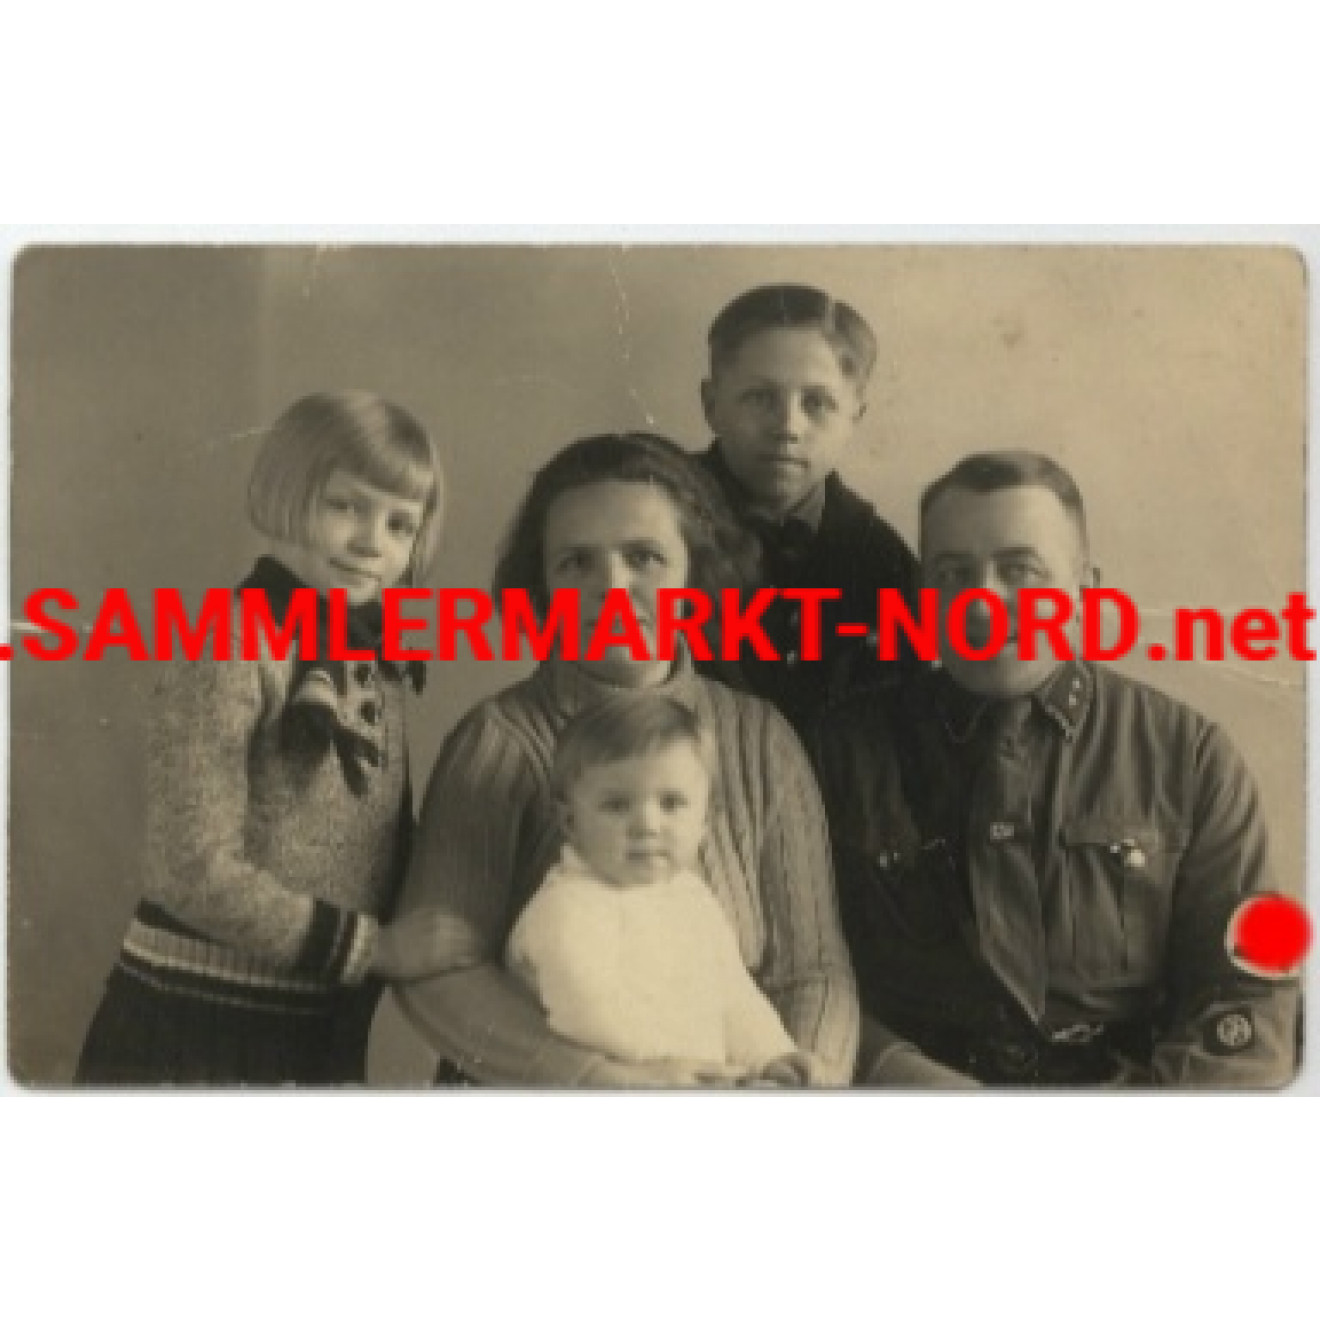 NSKK leader with insignias and NSDAP party badge